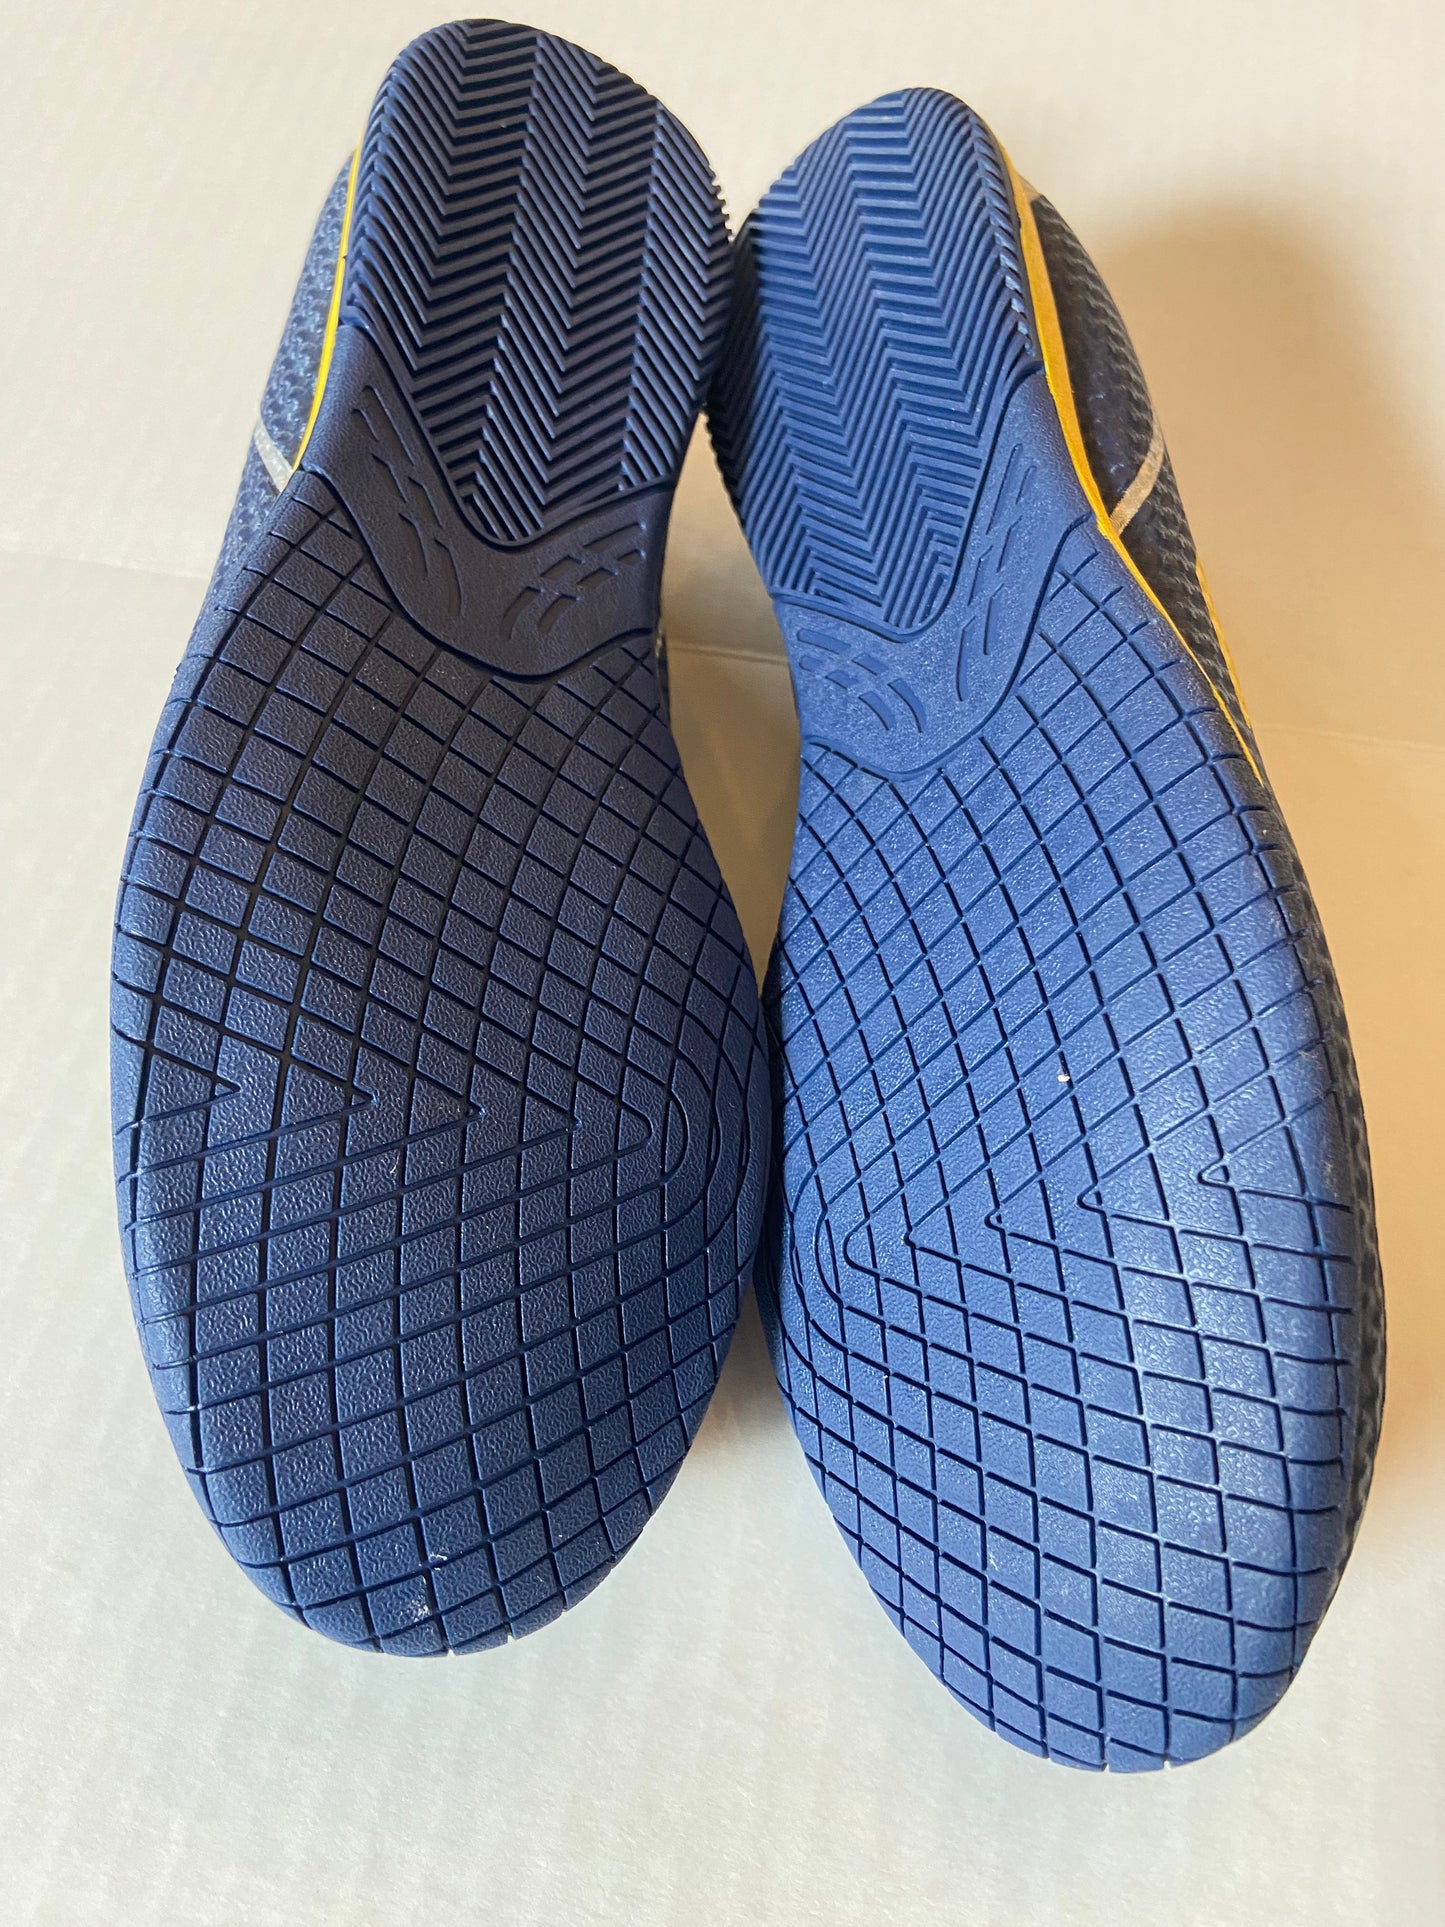 New Tolln Navy Soccer Shoes, Size 38 or Men's Size 7